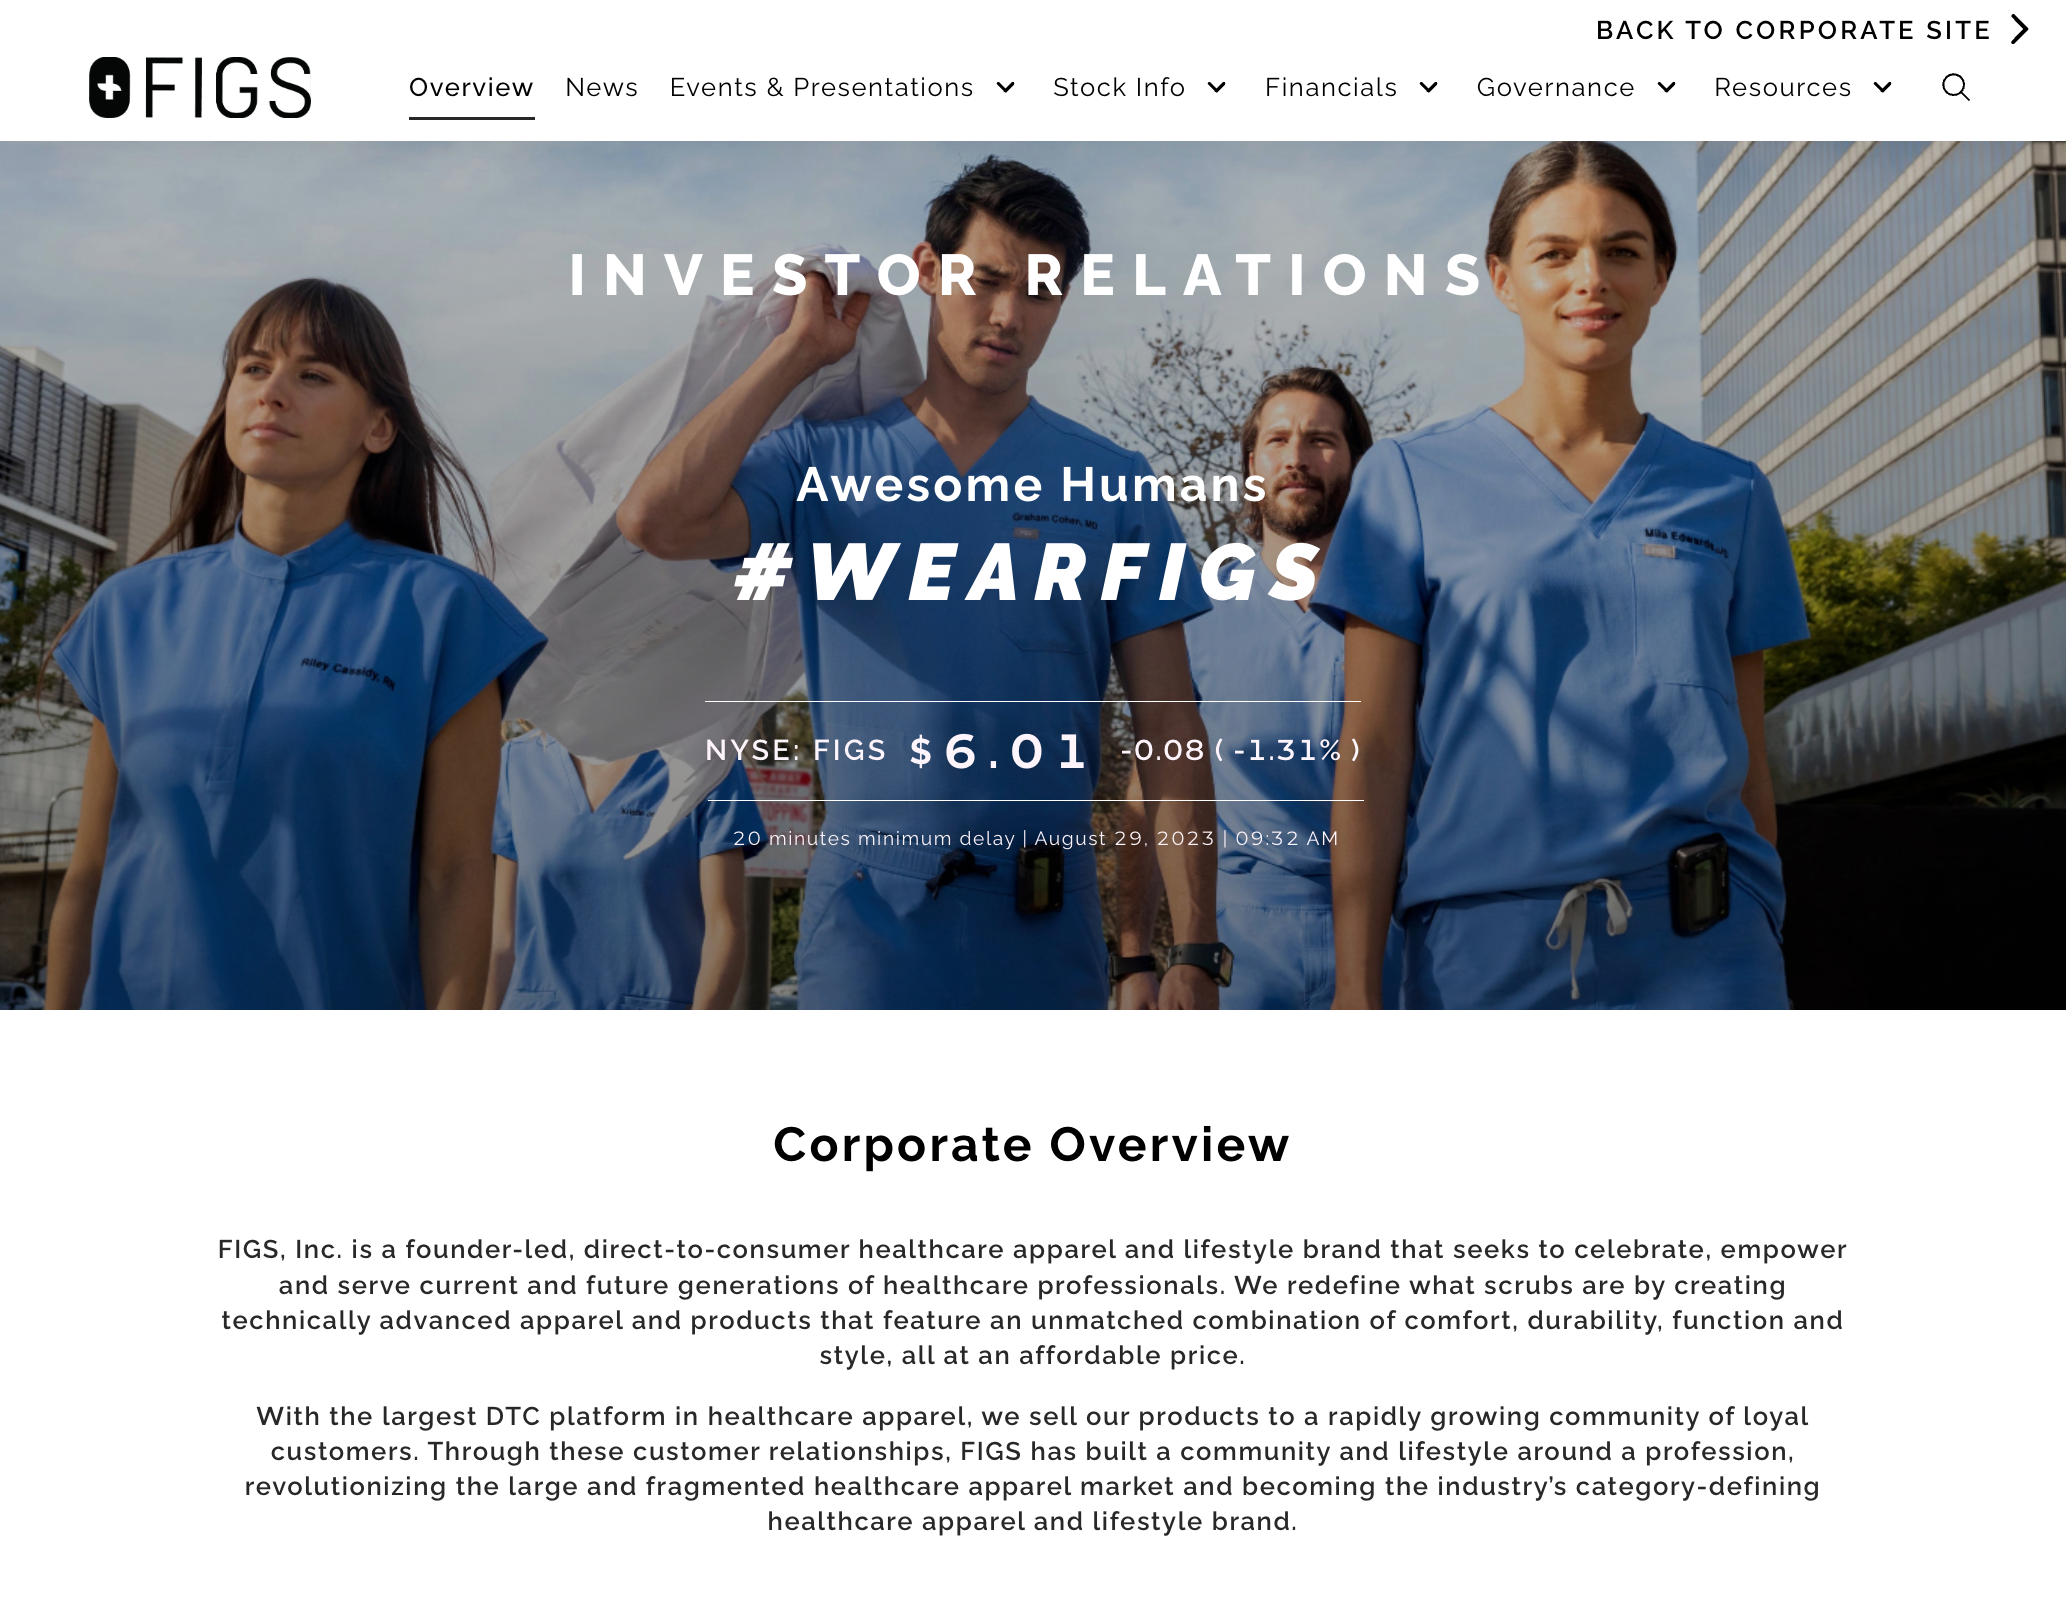 A webpage on the FIGS website showing an executive summary